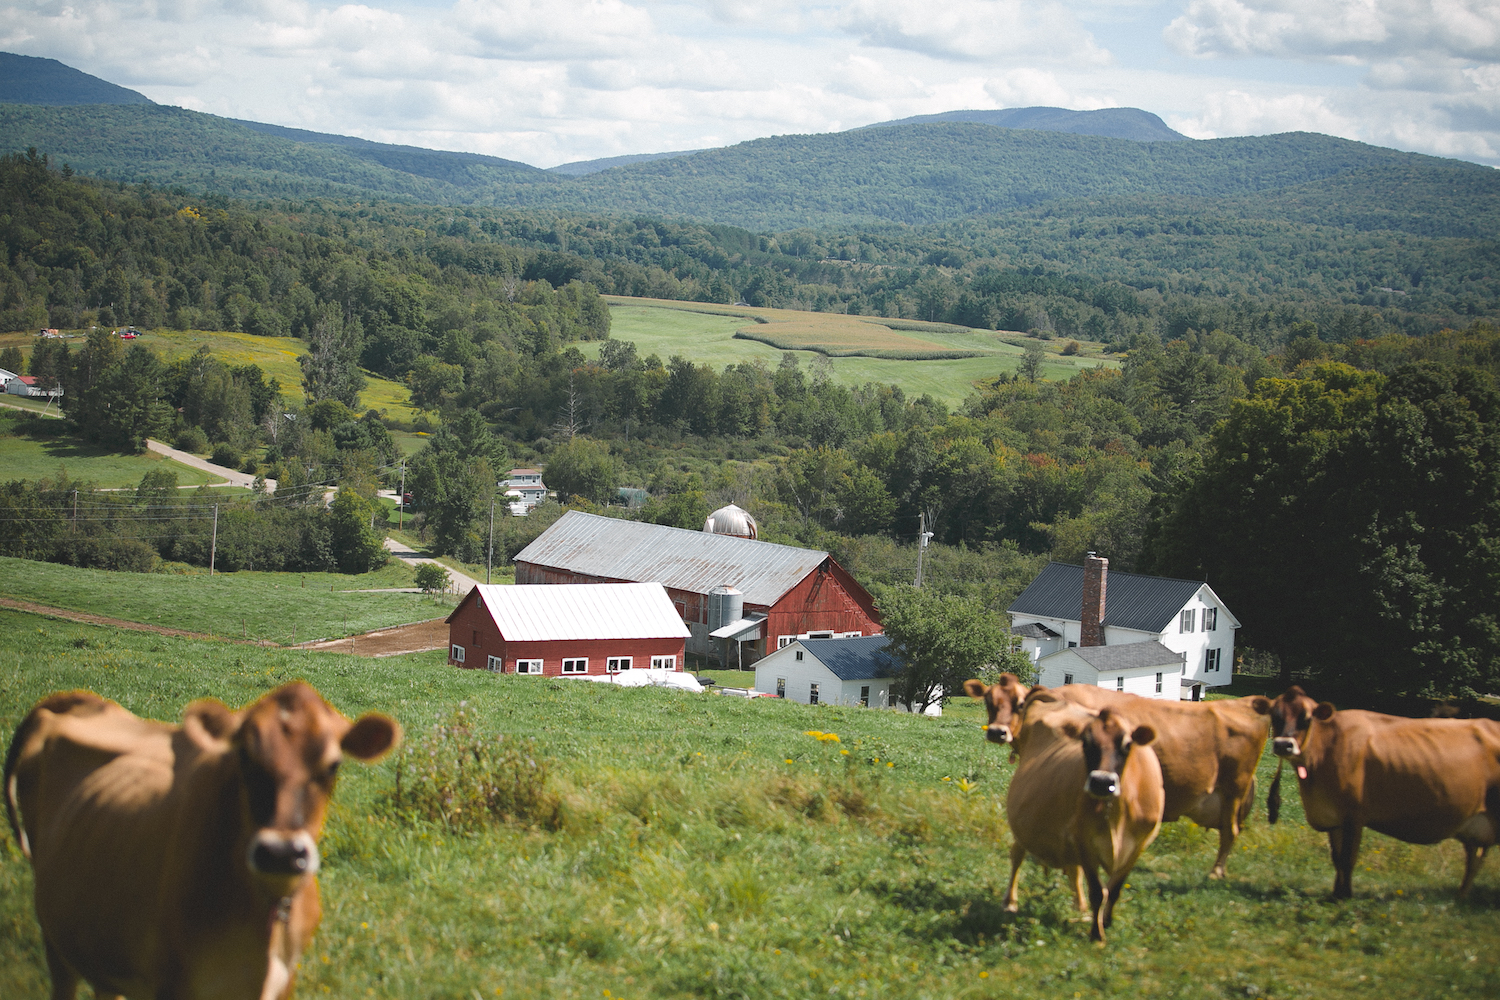 The fate of the dairy farm iindustry in Vermont.